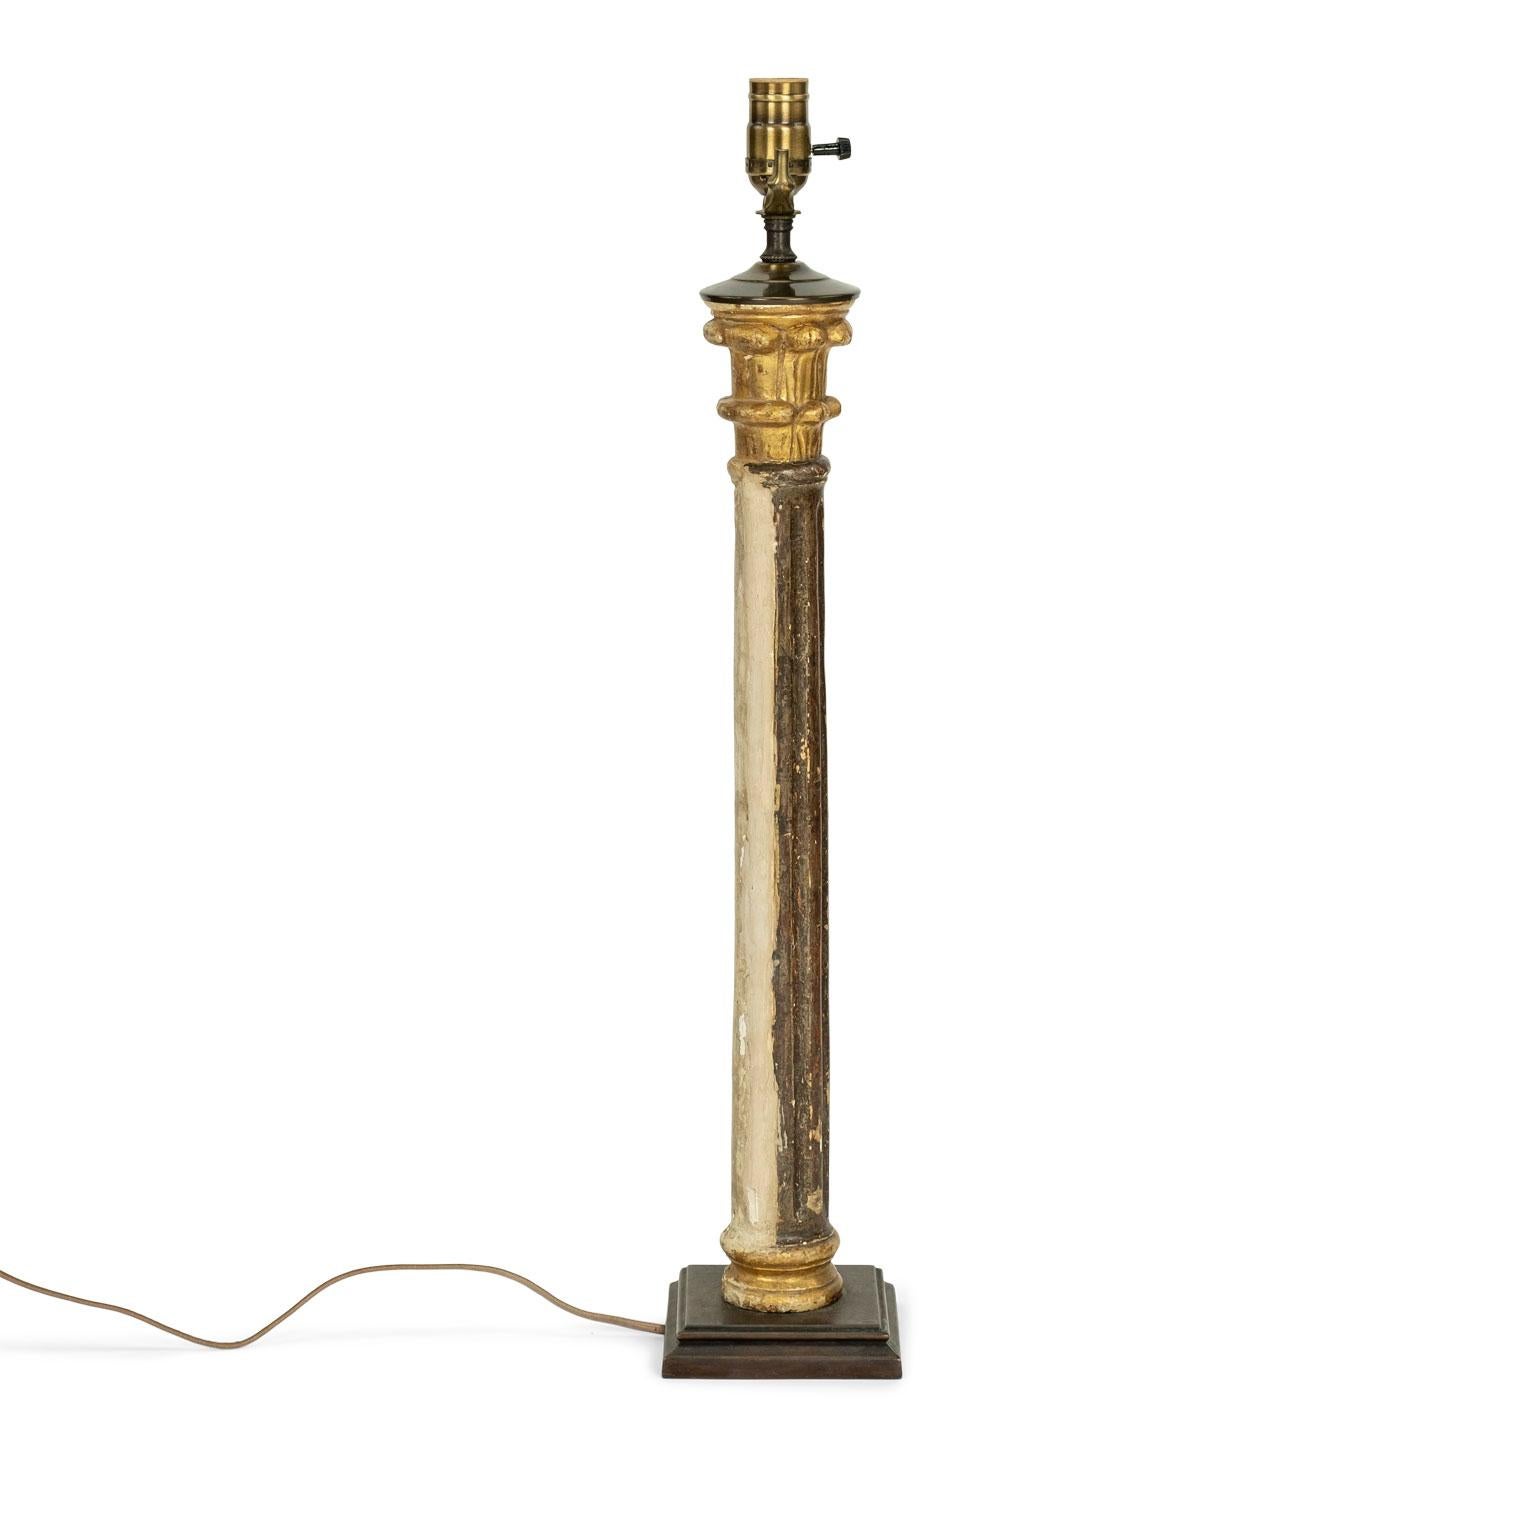 Custom giltwood column table lamp: early 19th century hand-carved giltwood column newly wired as a table lamp. Wired for use within the USA. Sold without shade.

Note: Original/early finish on antique and vintage metal will include some, or all, of